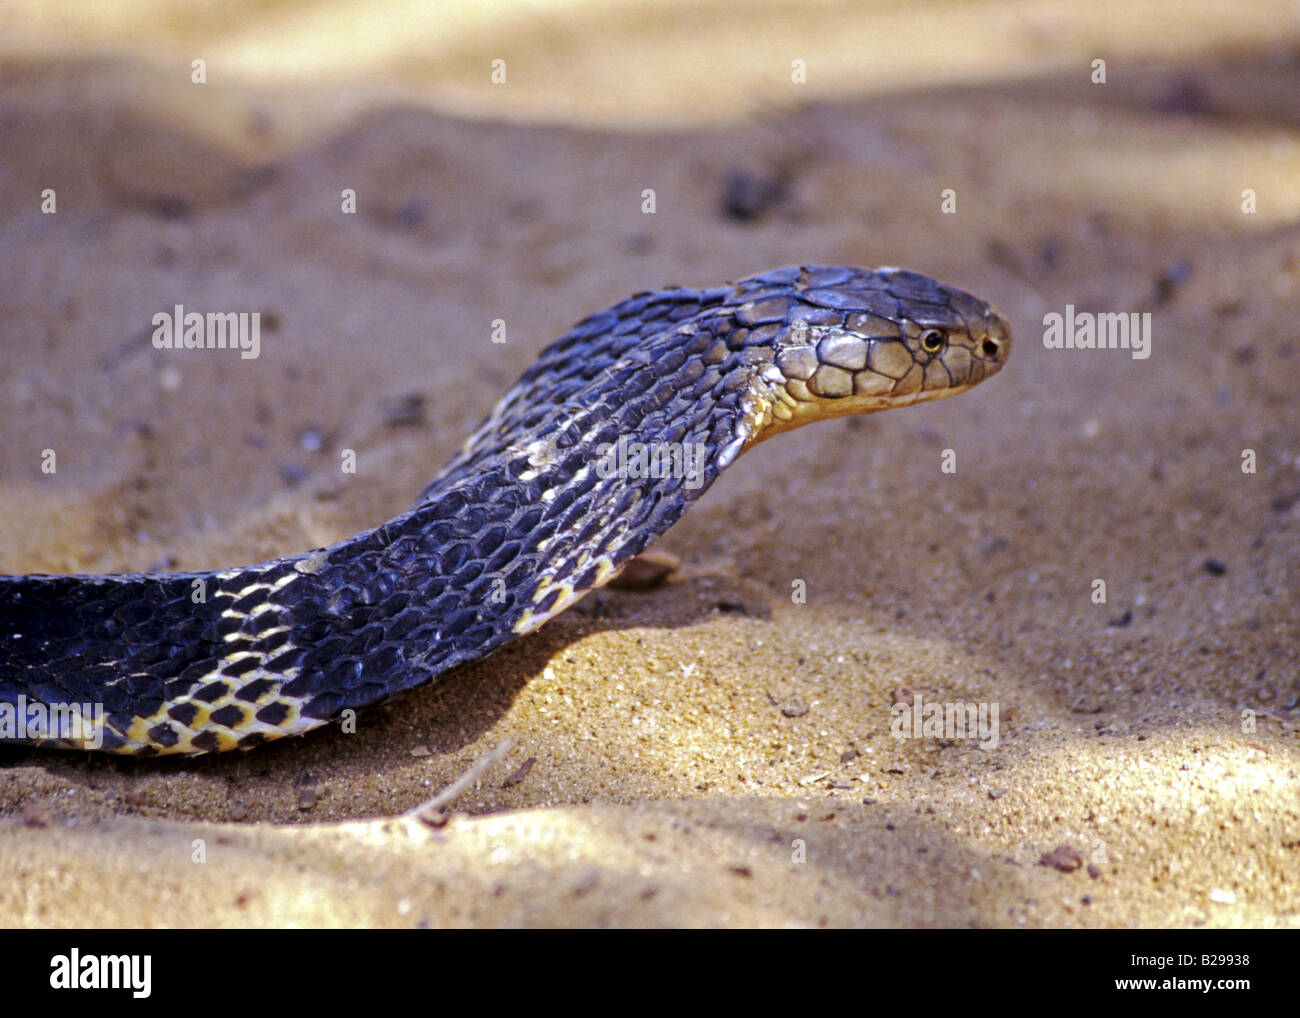 King Cobra Goa State India Date 15 06 2008 Ref ZB548 115573 0102 COMPULSORY CREDIT World Pictures Photoshot Stock Photo